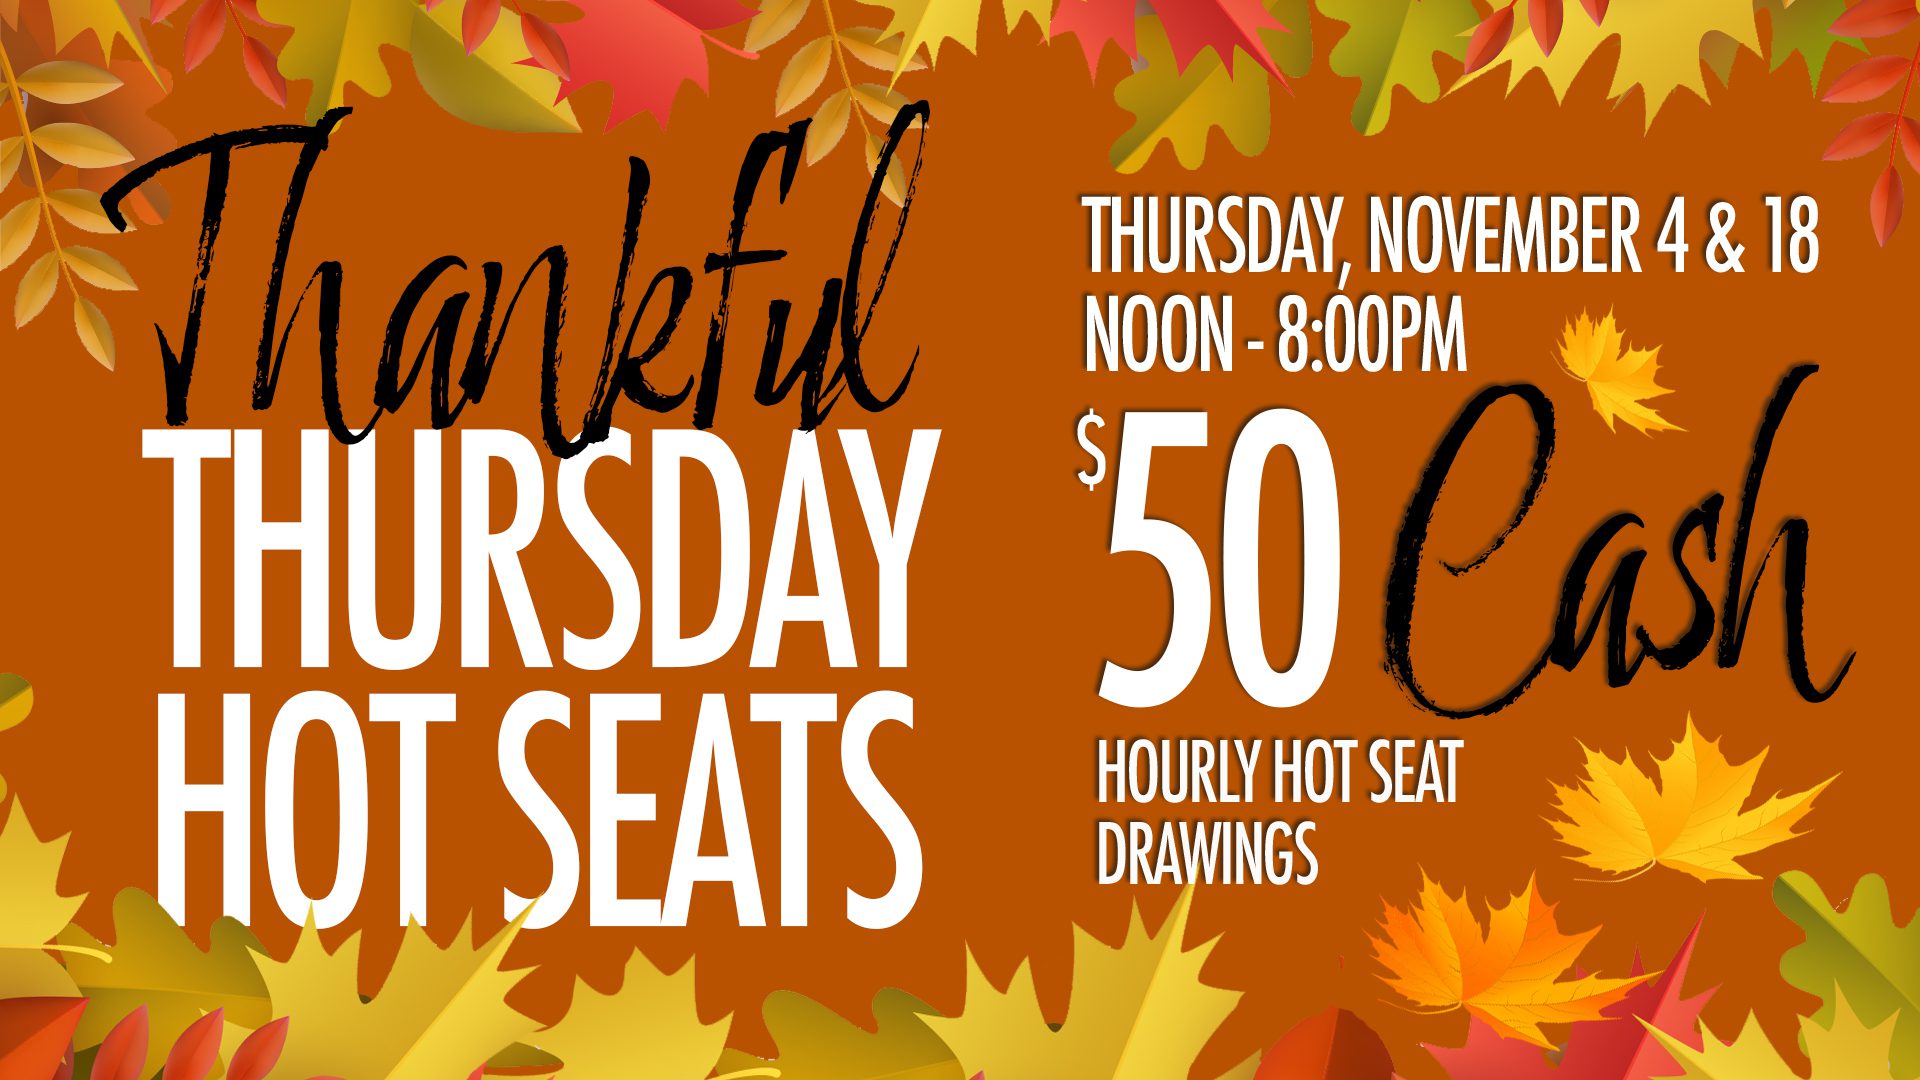 Promotional flyer for "thankful thursday hot seats" event with hourly hot seat drawings on november 4 & 18, from noon to 8:00 pm, offering $50 cash prizes, set against a backdrop of autumn leaves.